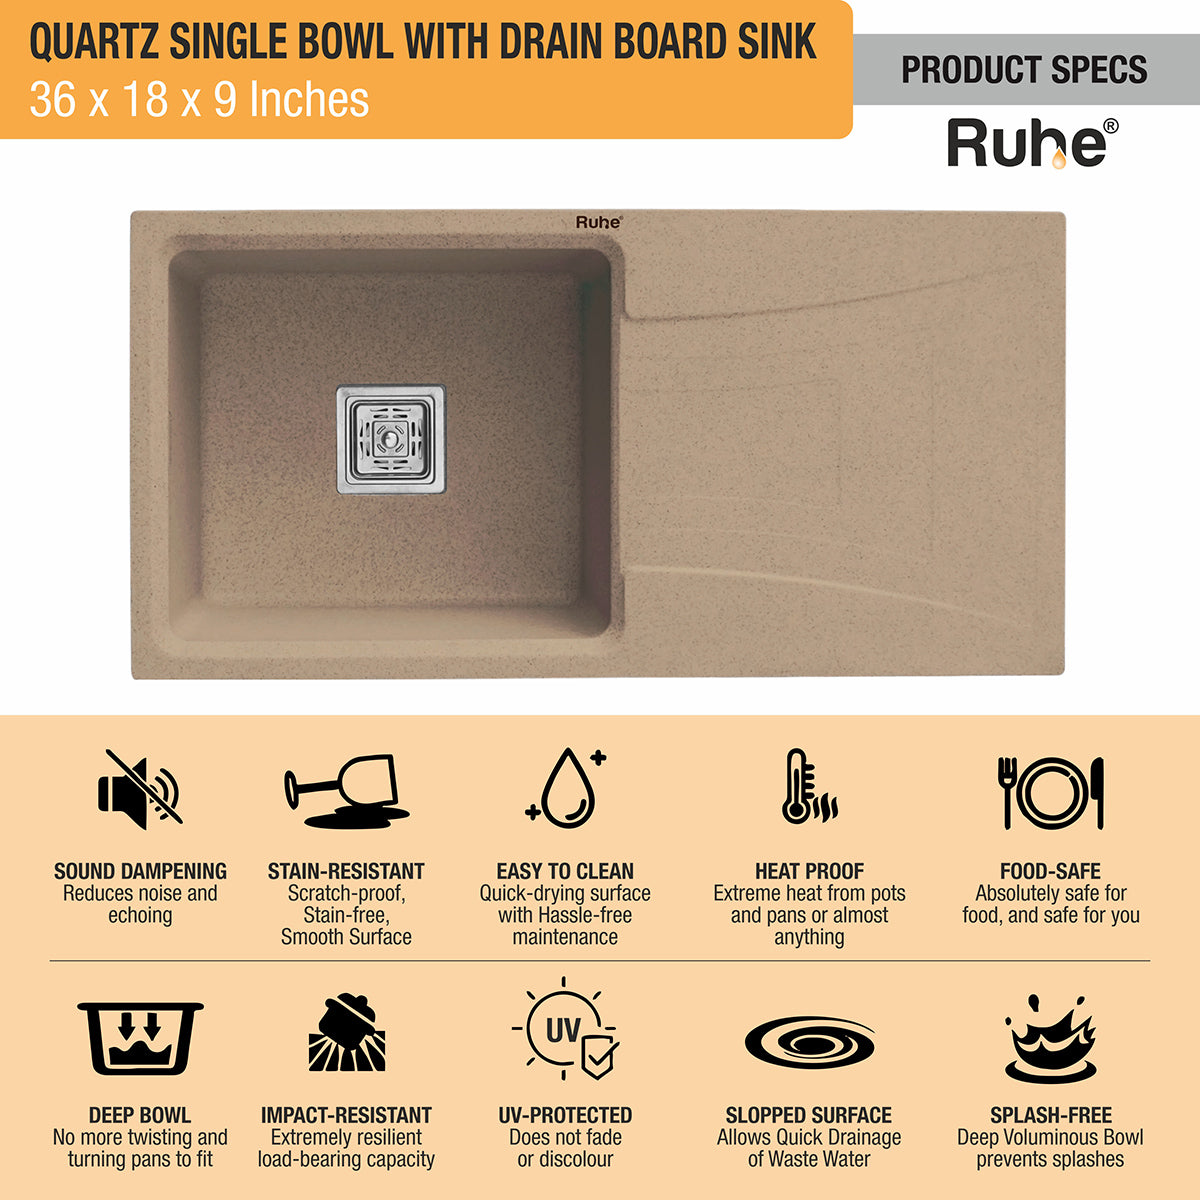 Quartz Single Bowl Sand Choco Kitchen Sink with Drainboard (36 x 18 x 9 inches) features and benefits